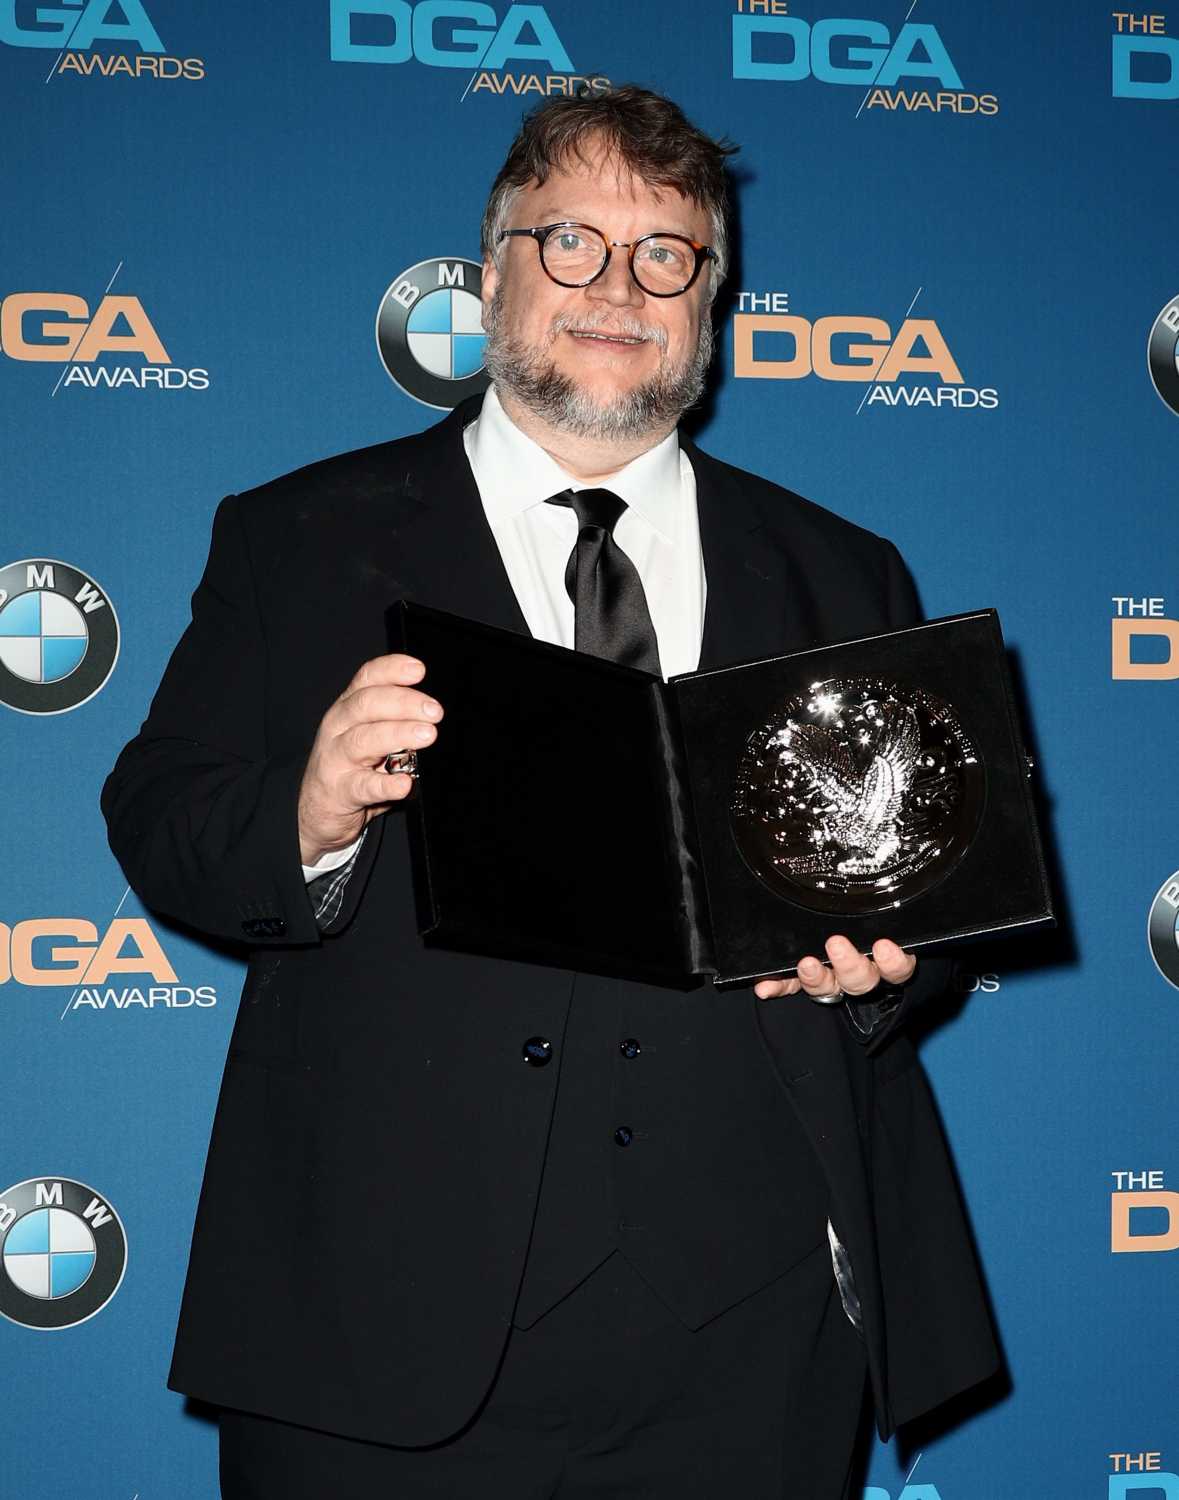 Director Guillermo del Toro, winner of the award for Outstanding Directorial Achievement in Feature Film for 'The Shape of Water' poses in the press room during the 70th Annual Directors Guild Of America Awards at The Beverly Hilton Hotel on February 3, 2018 in Beverly Hills, California. (Photo by Frederick M. Brown/Getty Images). (02/2018)